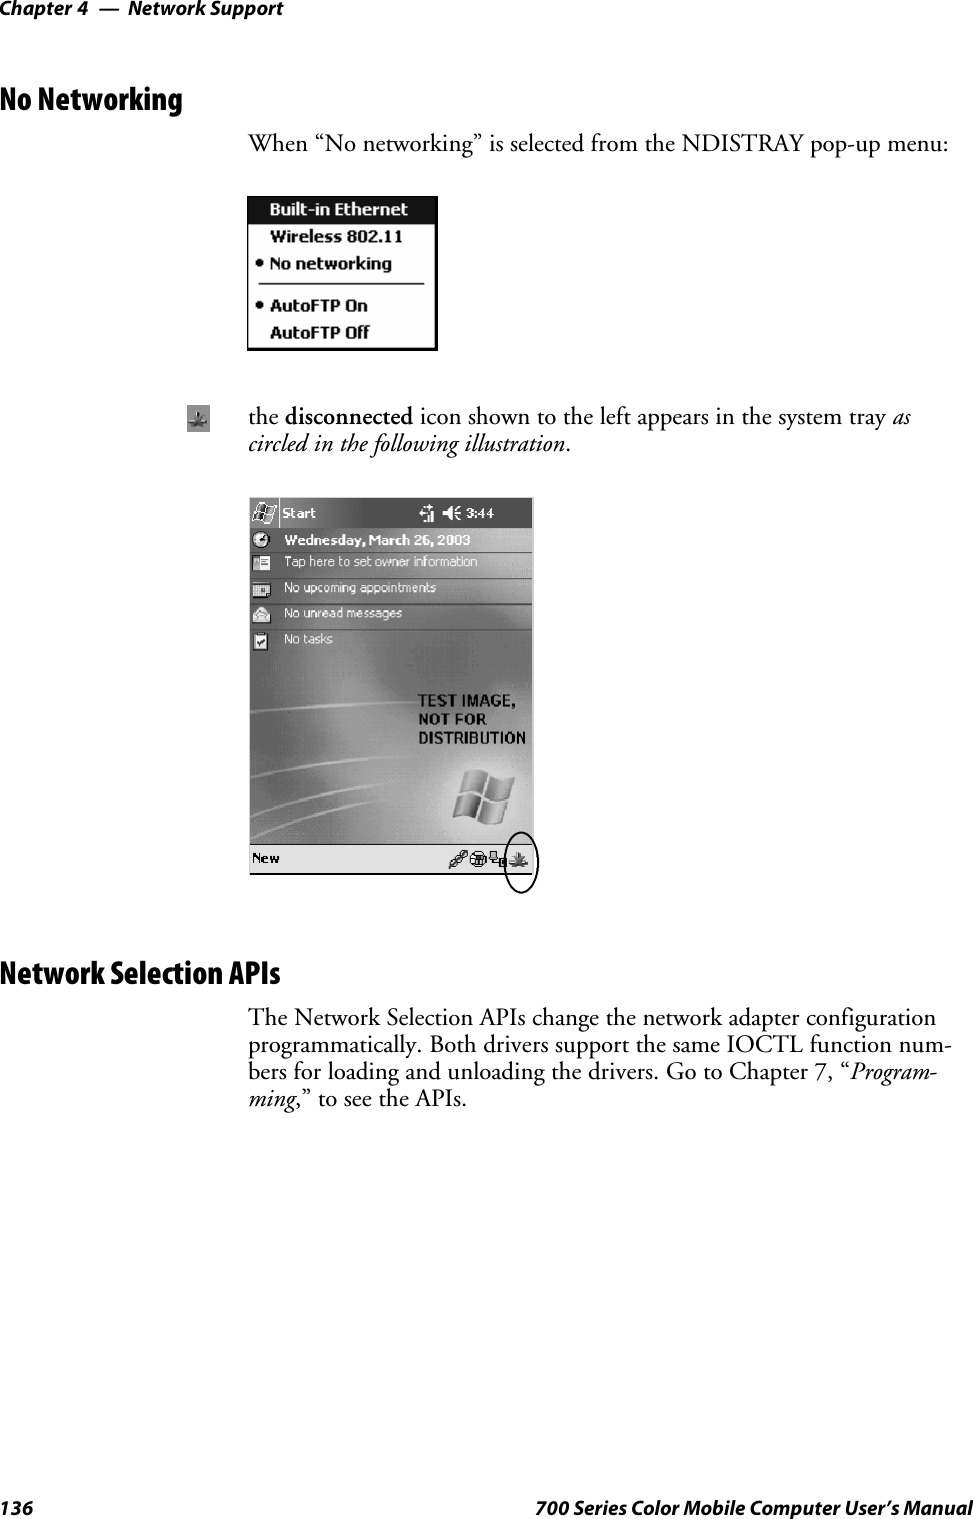 Network SupportChapter —4136 700 Series Color Mobile Computer User’s ManualNo NetworkingWhen “No networking” is selected from the NDISTRAY pop-up menu:the disconnected icon shown to the left appears in the system tray ascircled in the following illustration.Network Selection APIsThe Network Selection APIs change the network adapter configurationprogrammatically. Both drivers support the same IOCTL function num-bers for loading and unloading the drivers. Go to Chapter 7, “Program-ming,” to see the APIs.